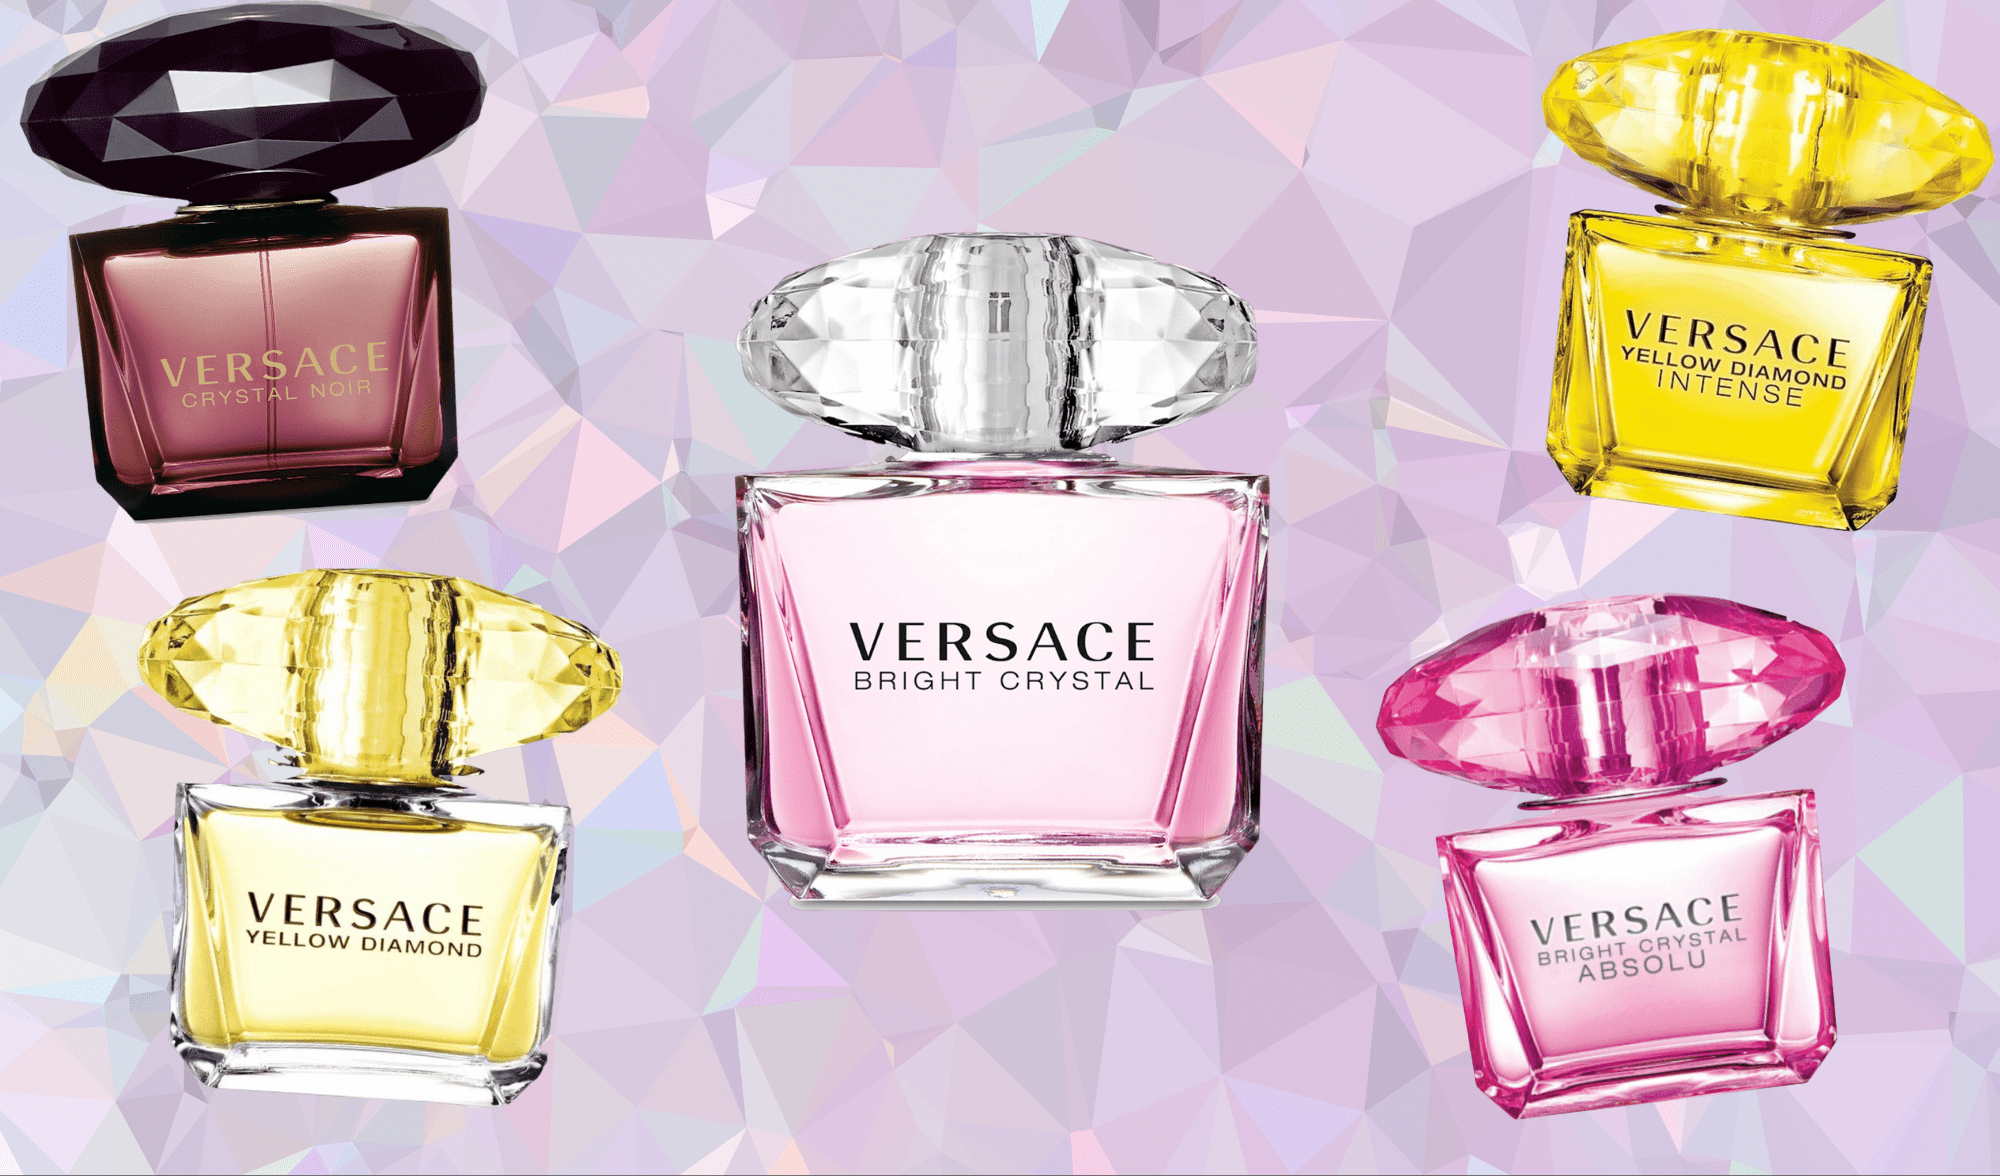 The Ultimate Guide To The Versace Crystal and Diamond Perfumes